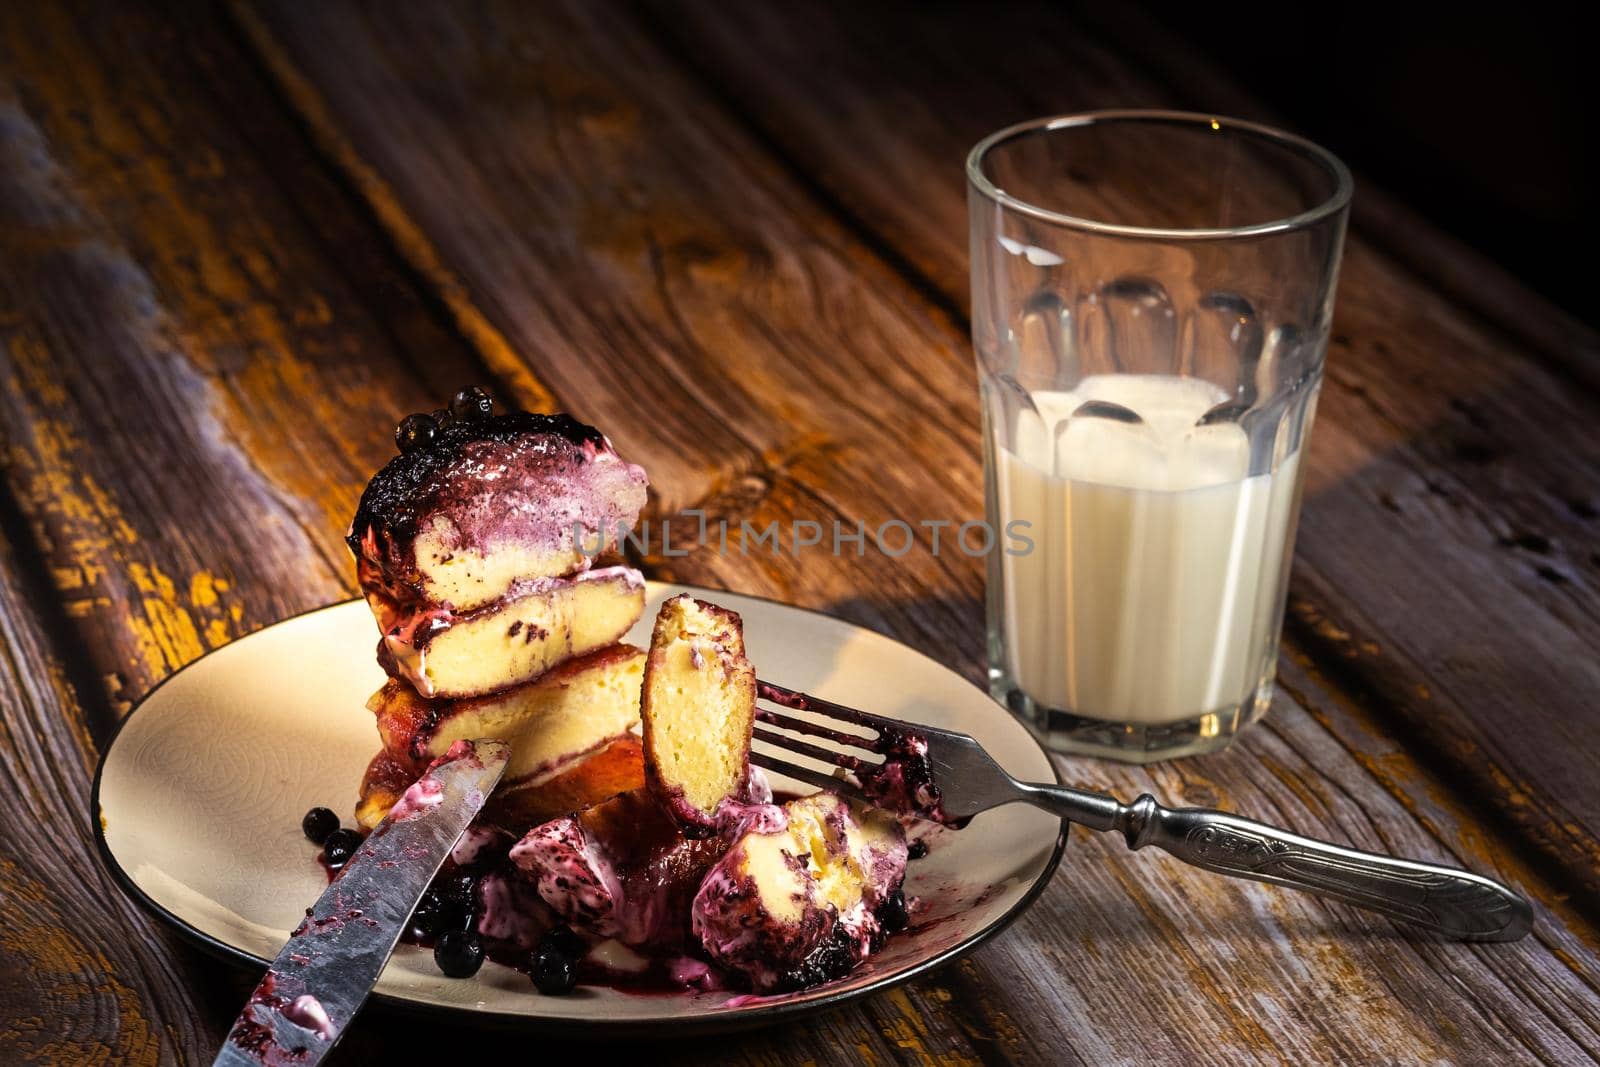 sliced cheesecakes with blueberry jam and sour cream on a plate and a glass of milk on a wooden table.